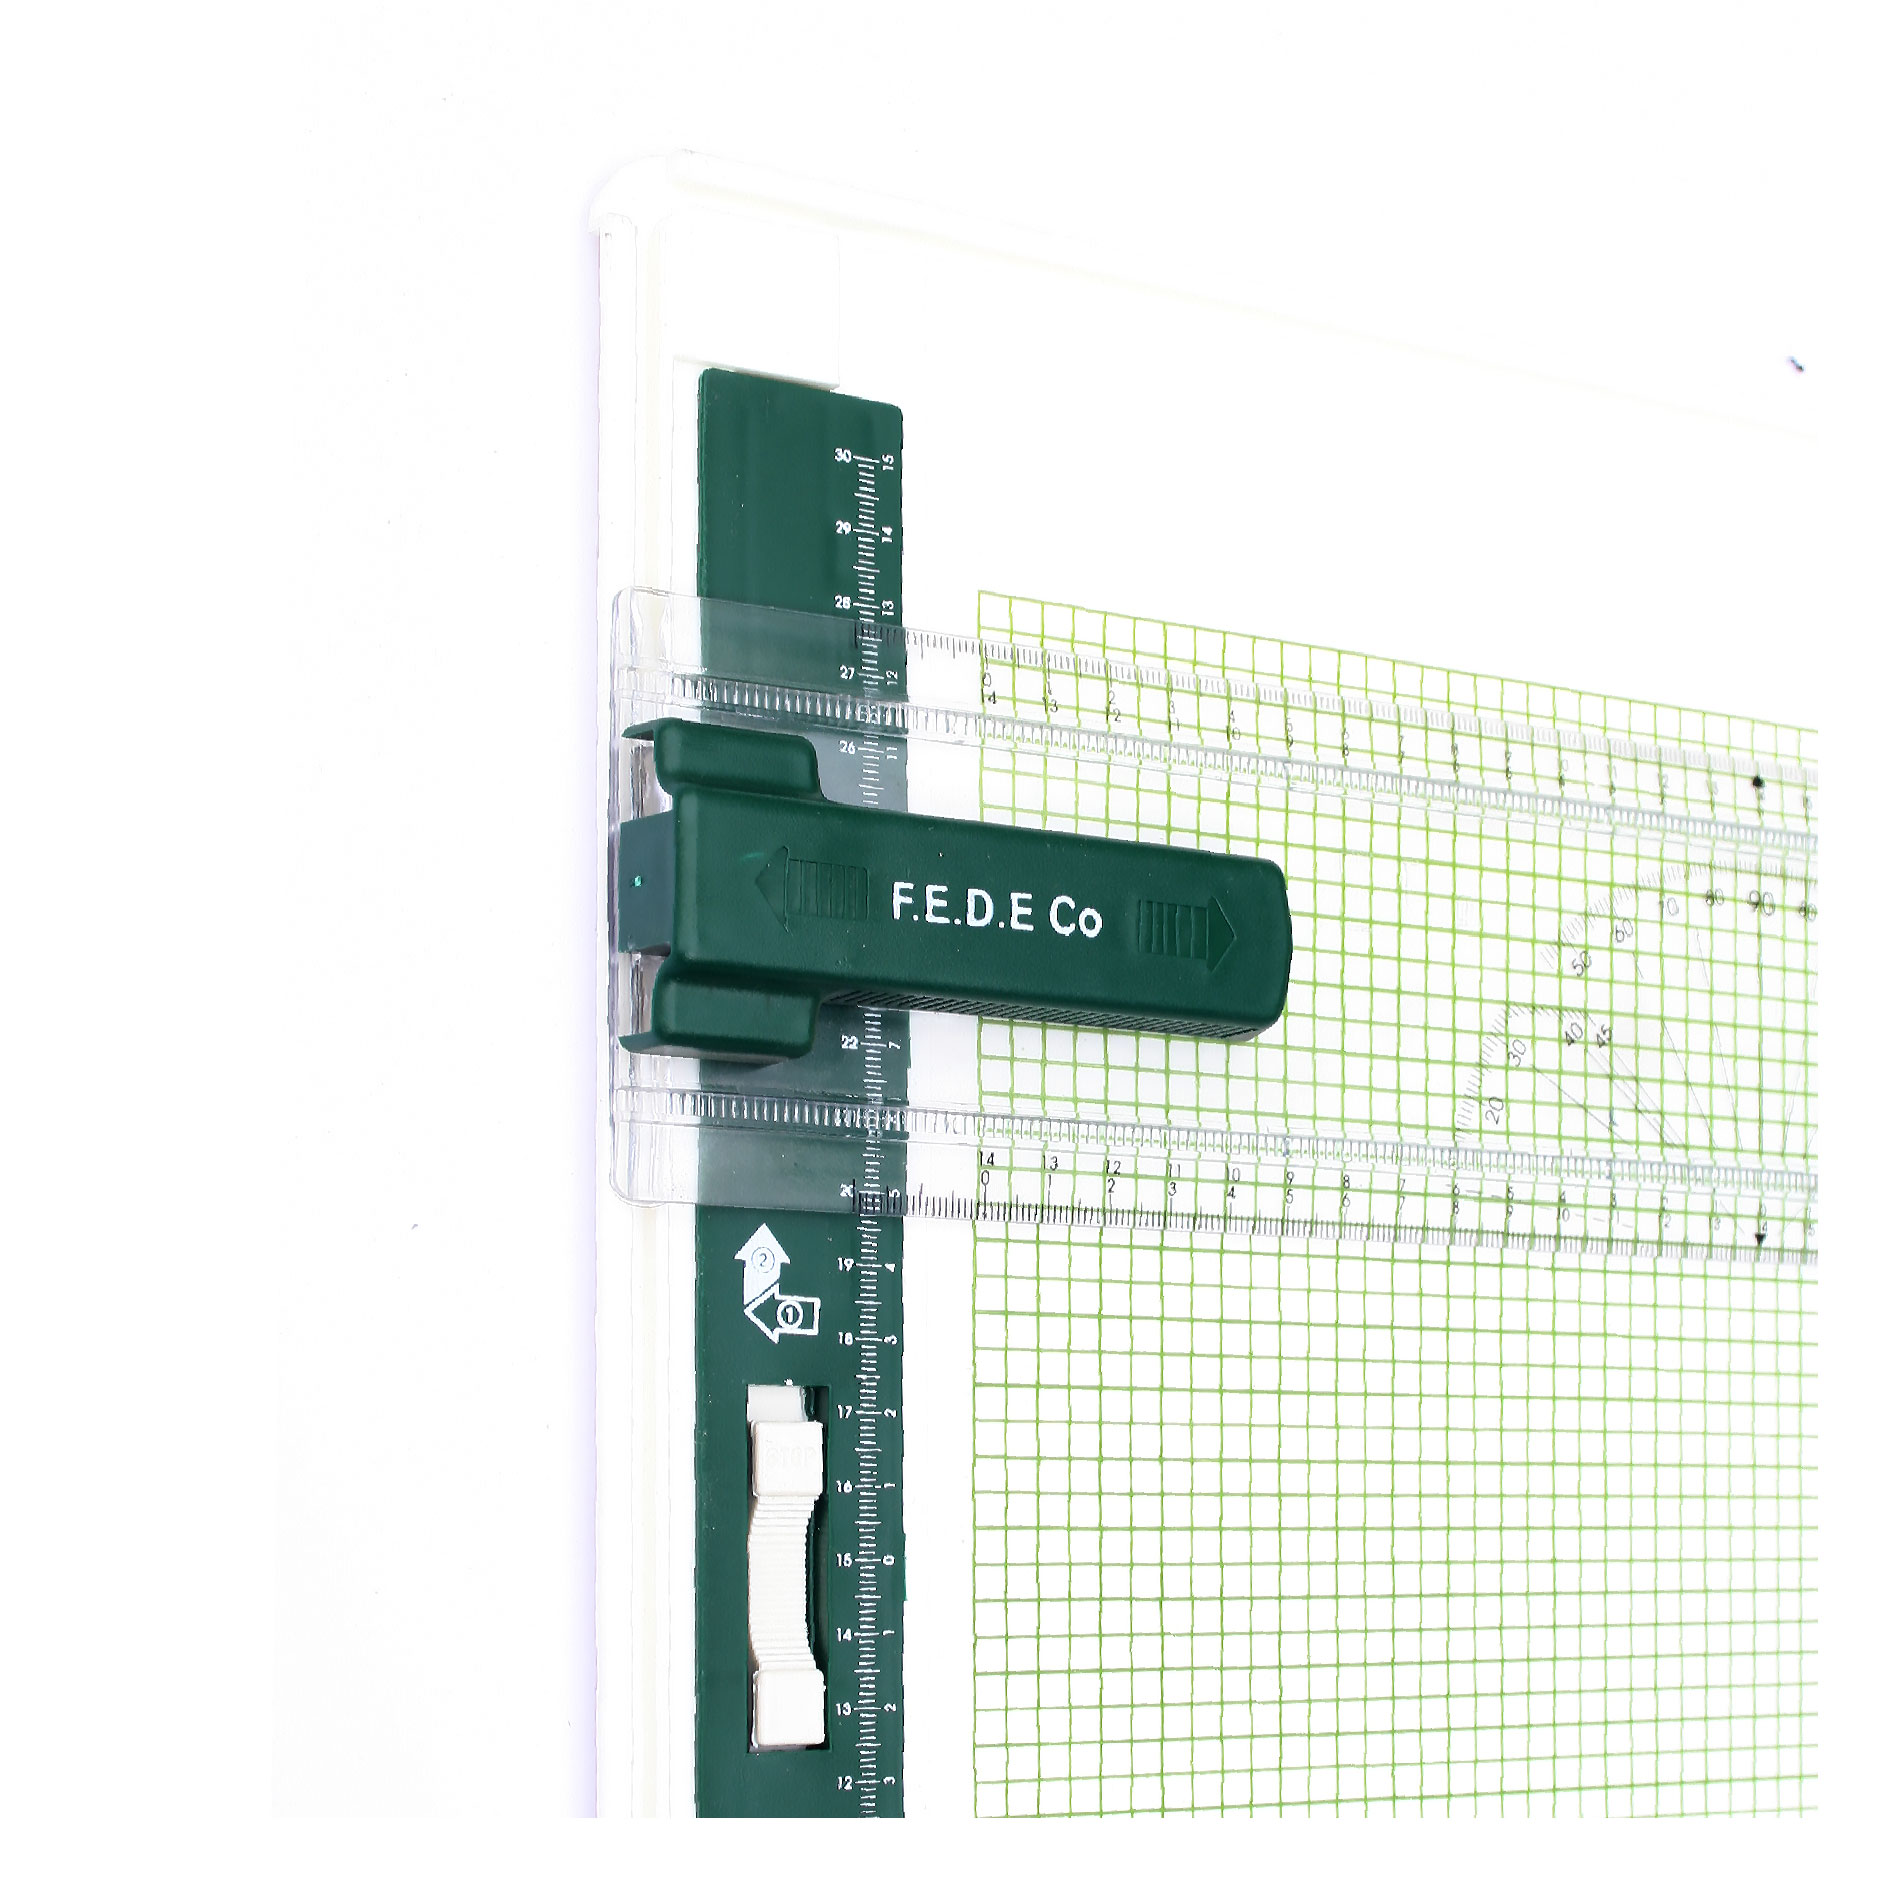 F.E.D.E.Co A3 Drawing boards with Steady ruler and Checker board